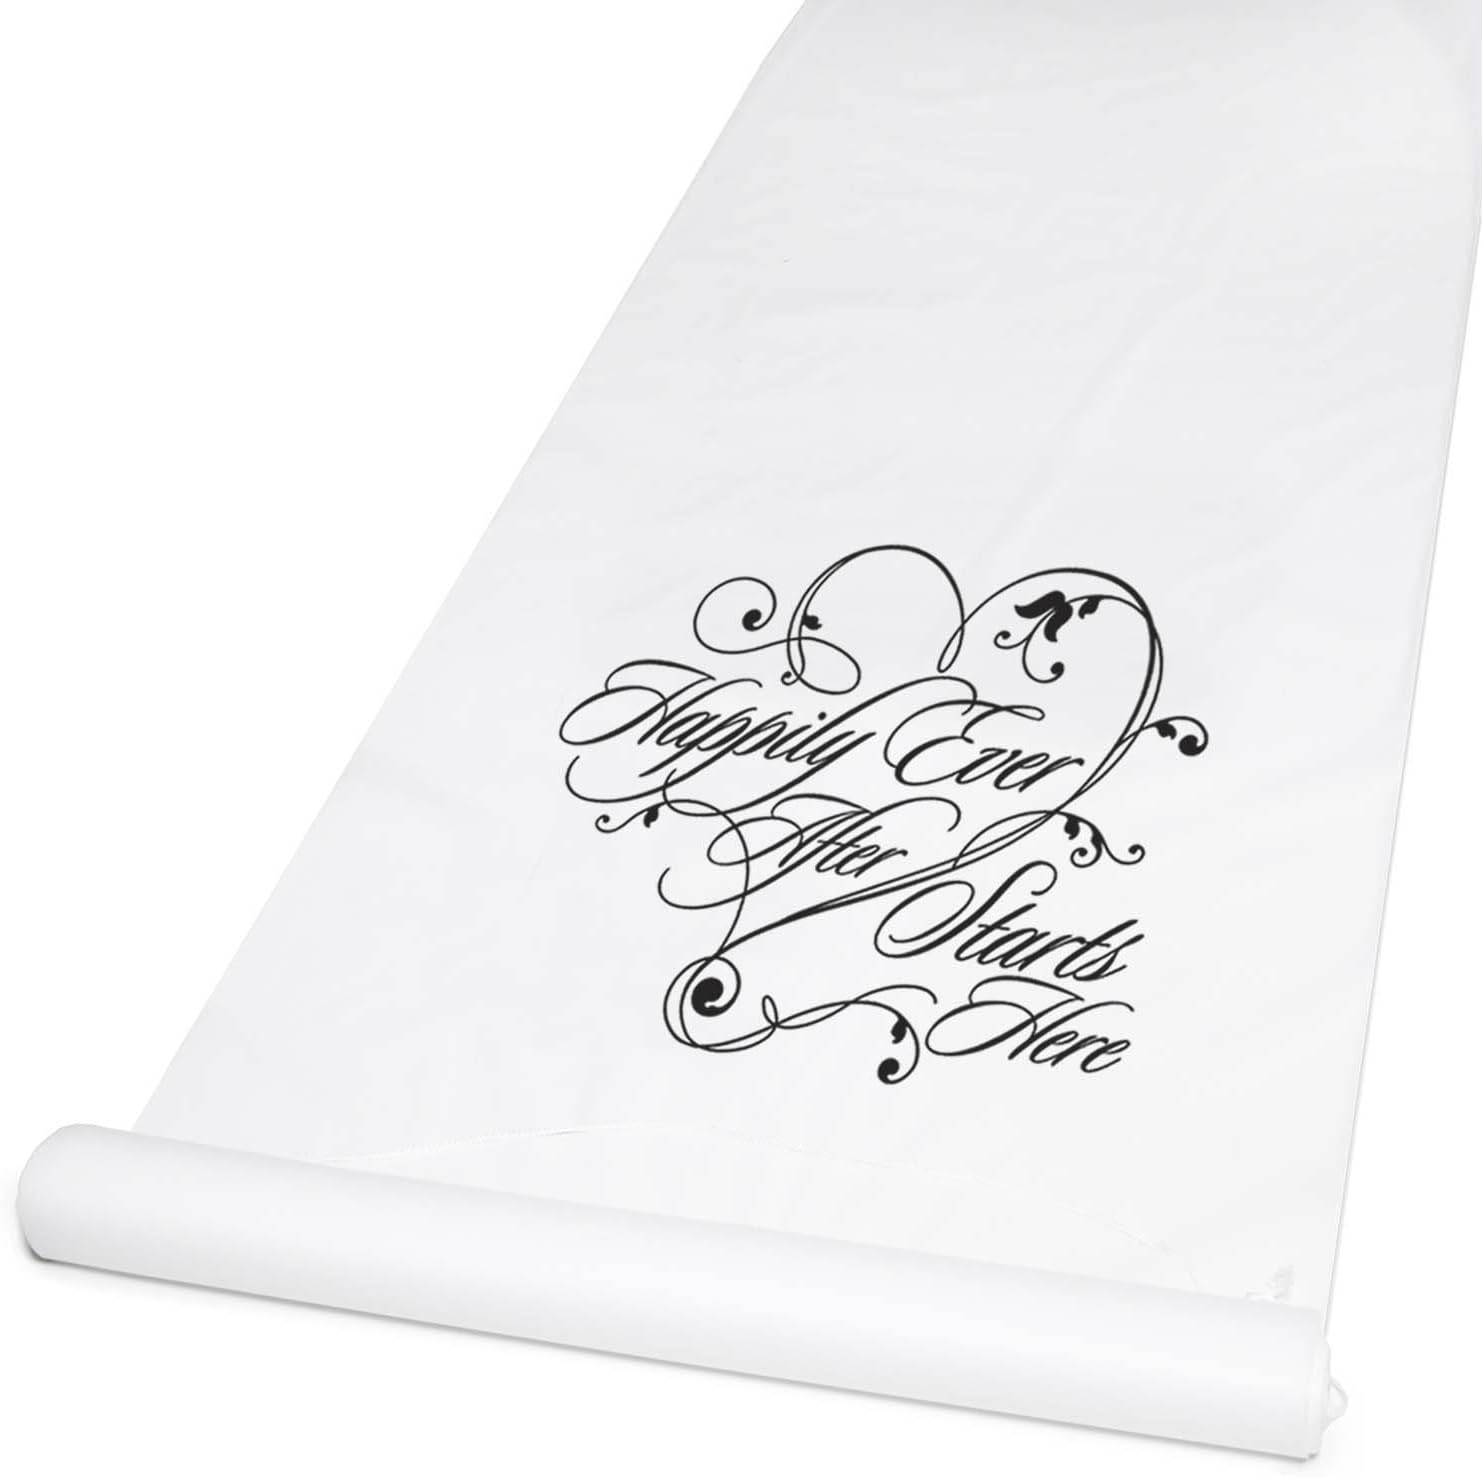 Happily Ever After White Wedding Aisle Runner 100 Feet Long